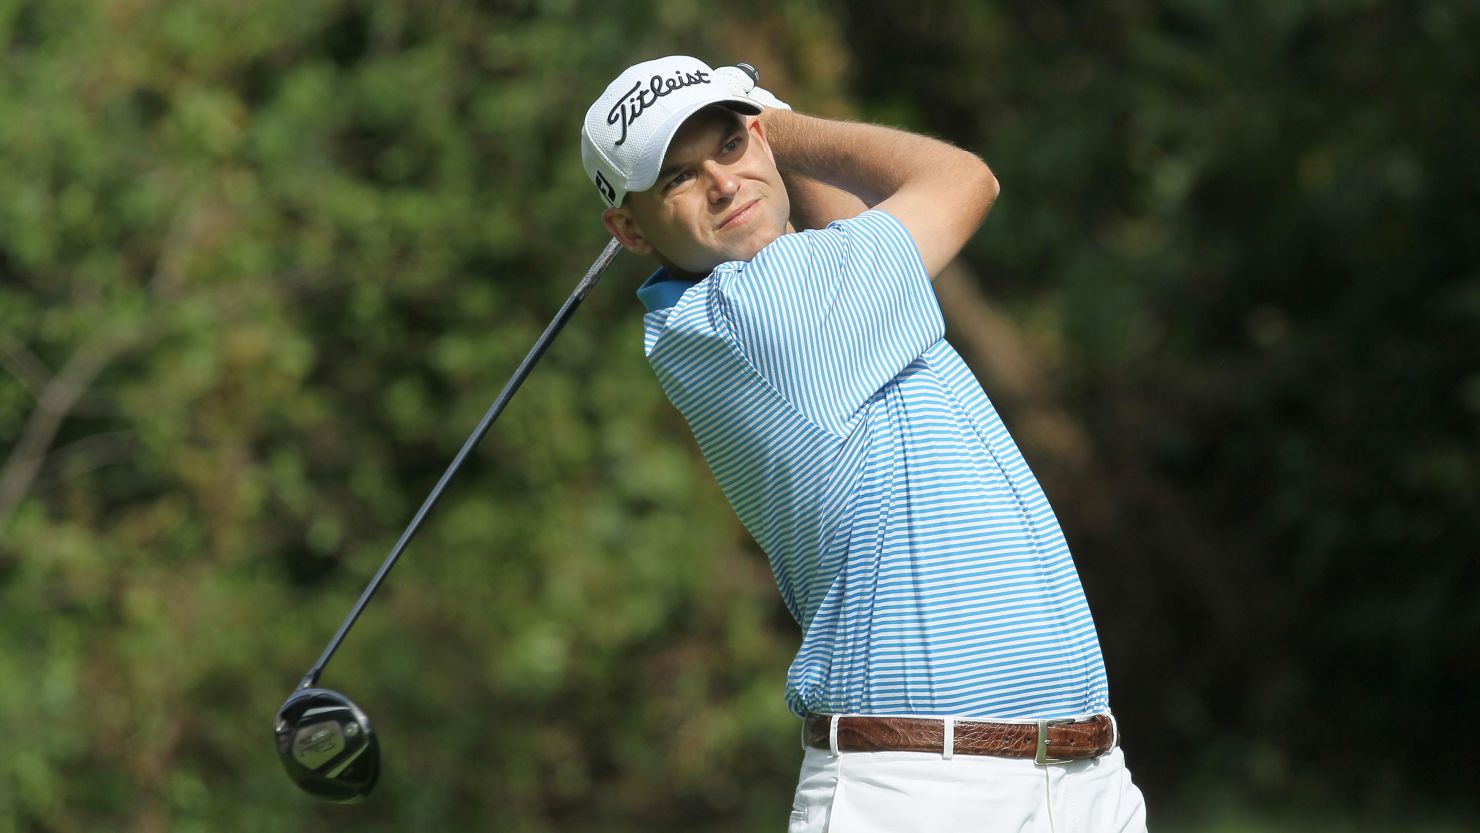 American golfer Bill Haas has moved up to 12th in the world rankings after  his win on Sunday.